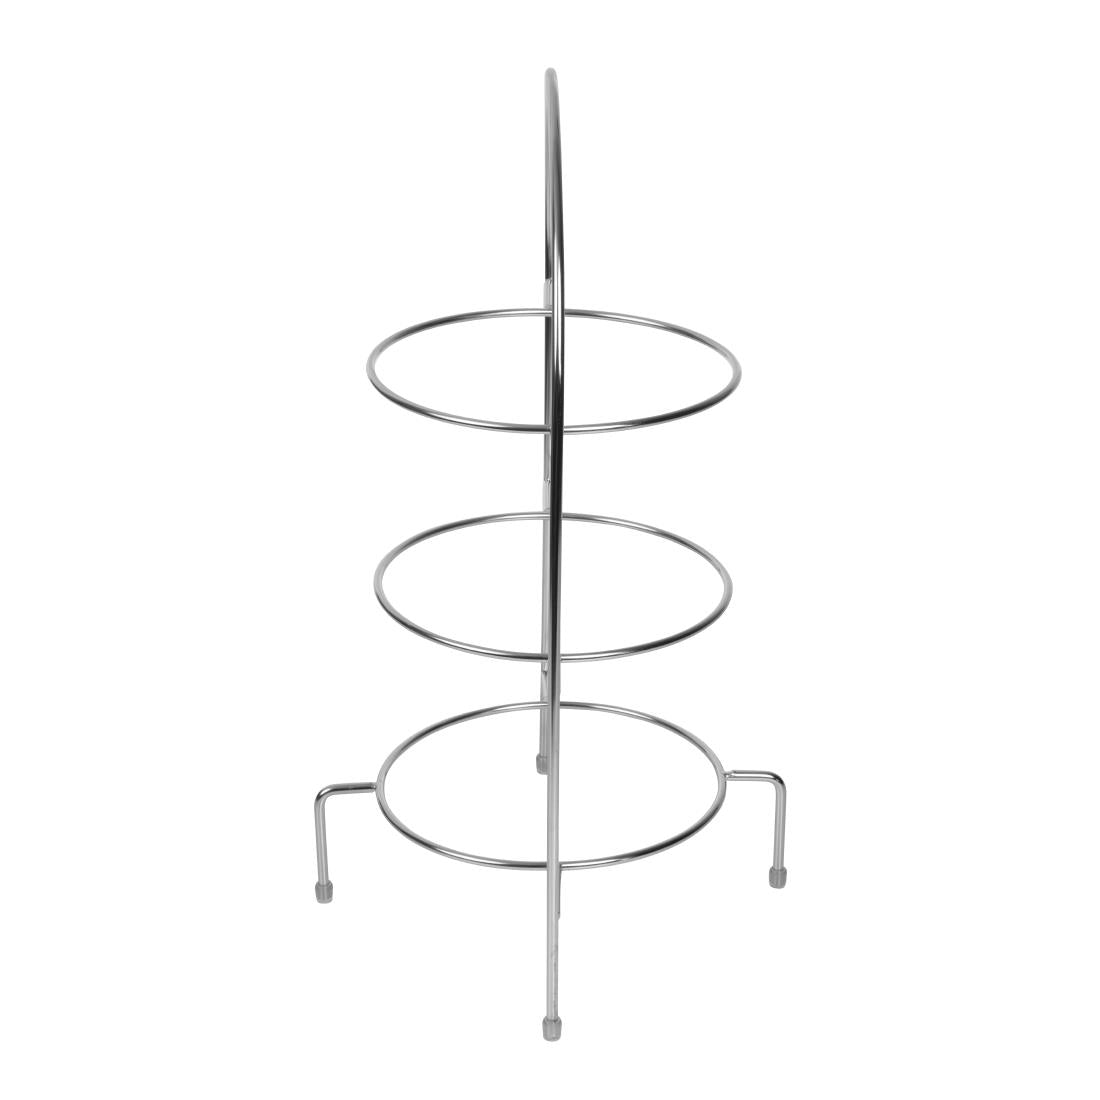 Afternoon Tea Stand for Plates Up To 210mm JD Catering Equipment Solutions Ltd